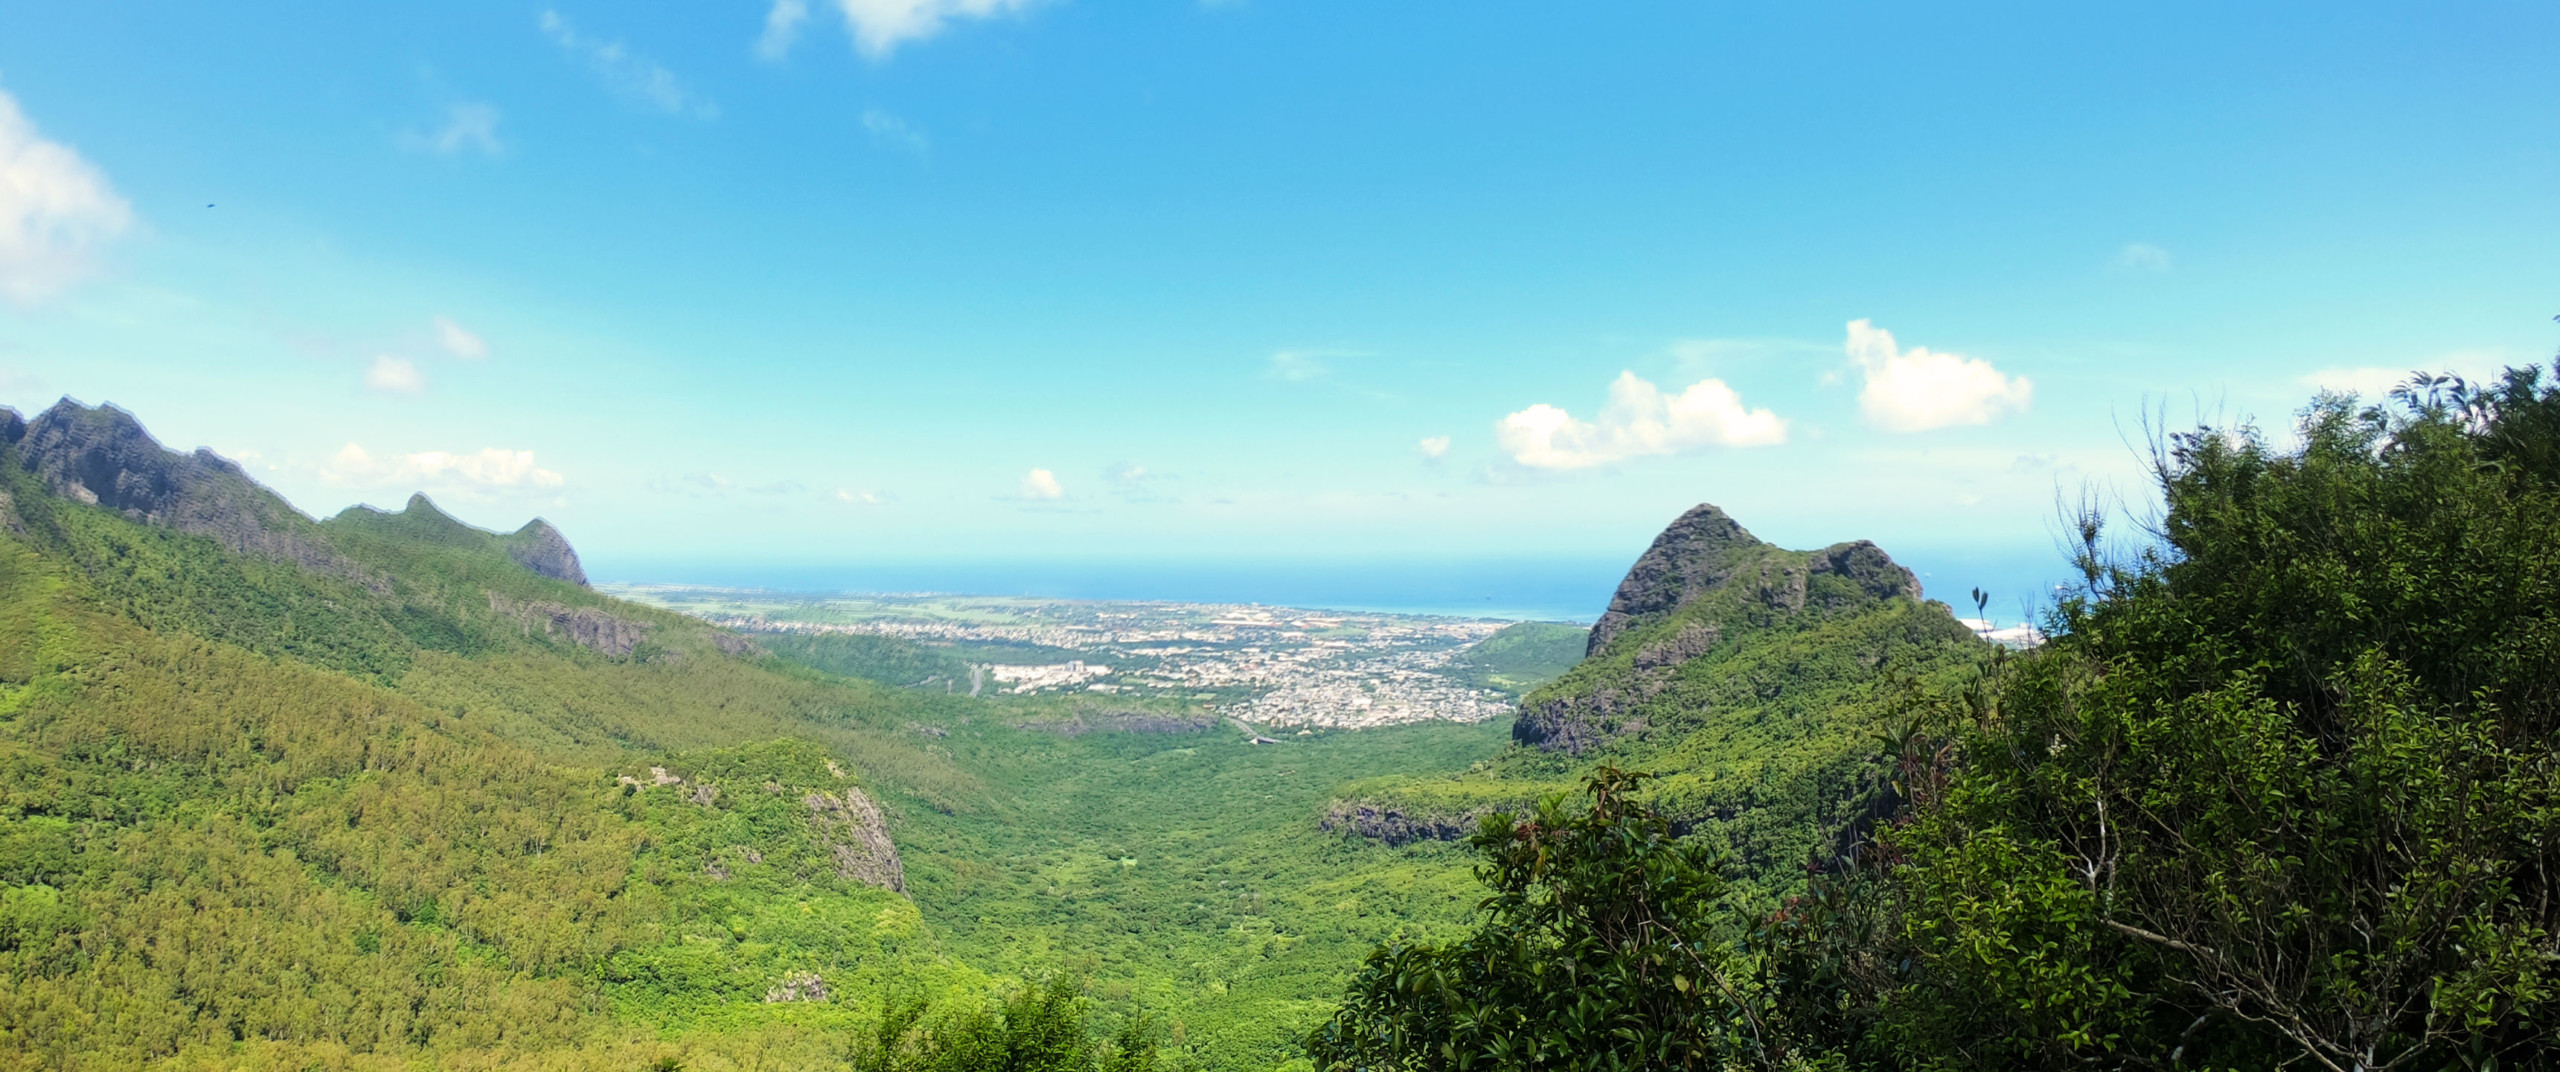 View from Le pouce Mountain - activities in Mauritius